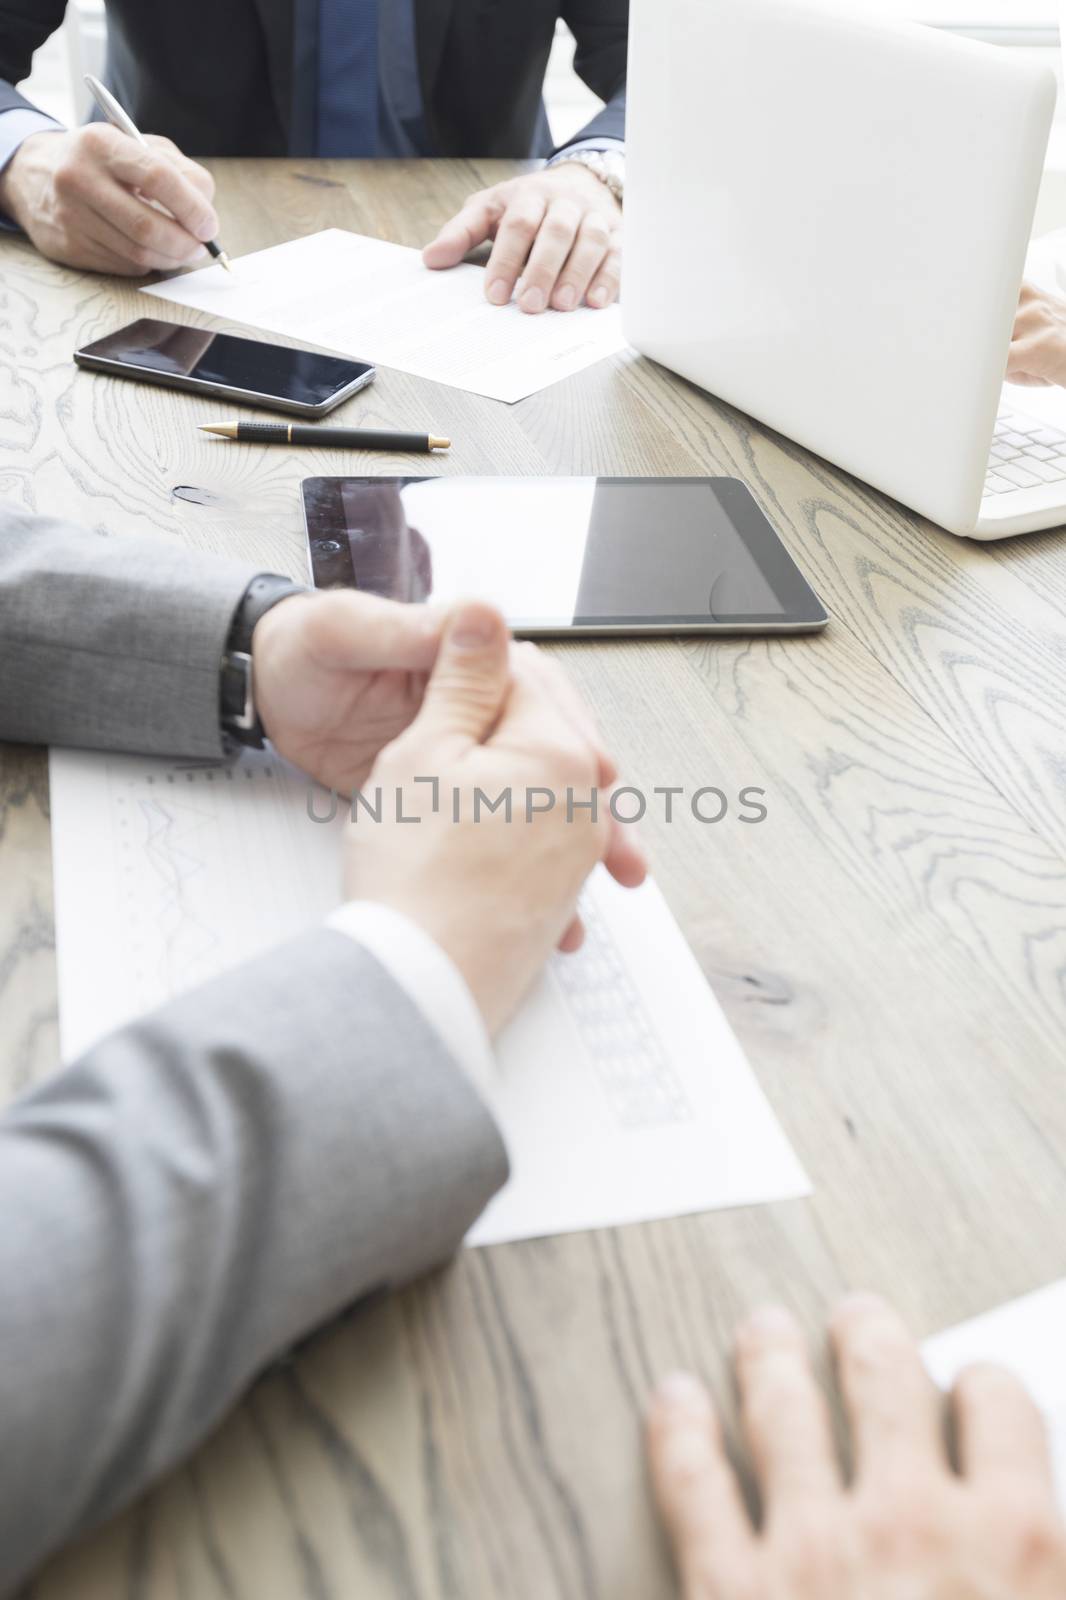 Business people work with documents and computers at office table close up